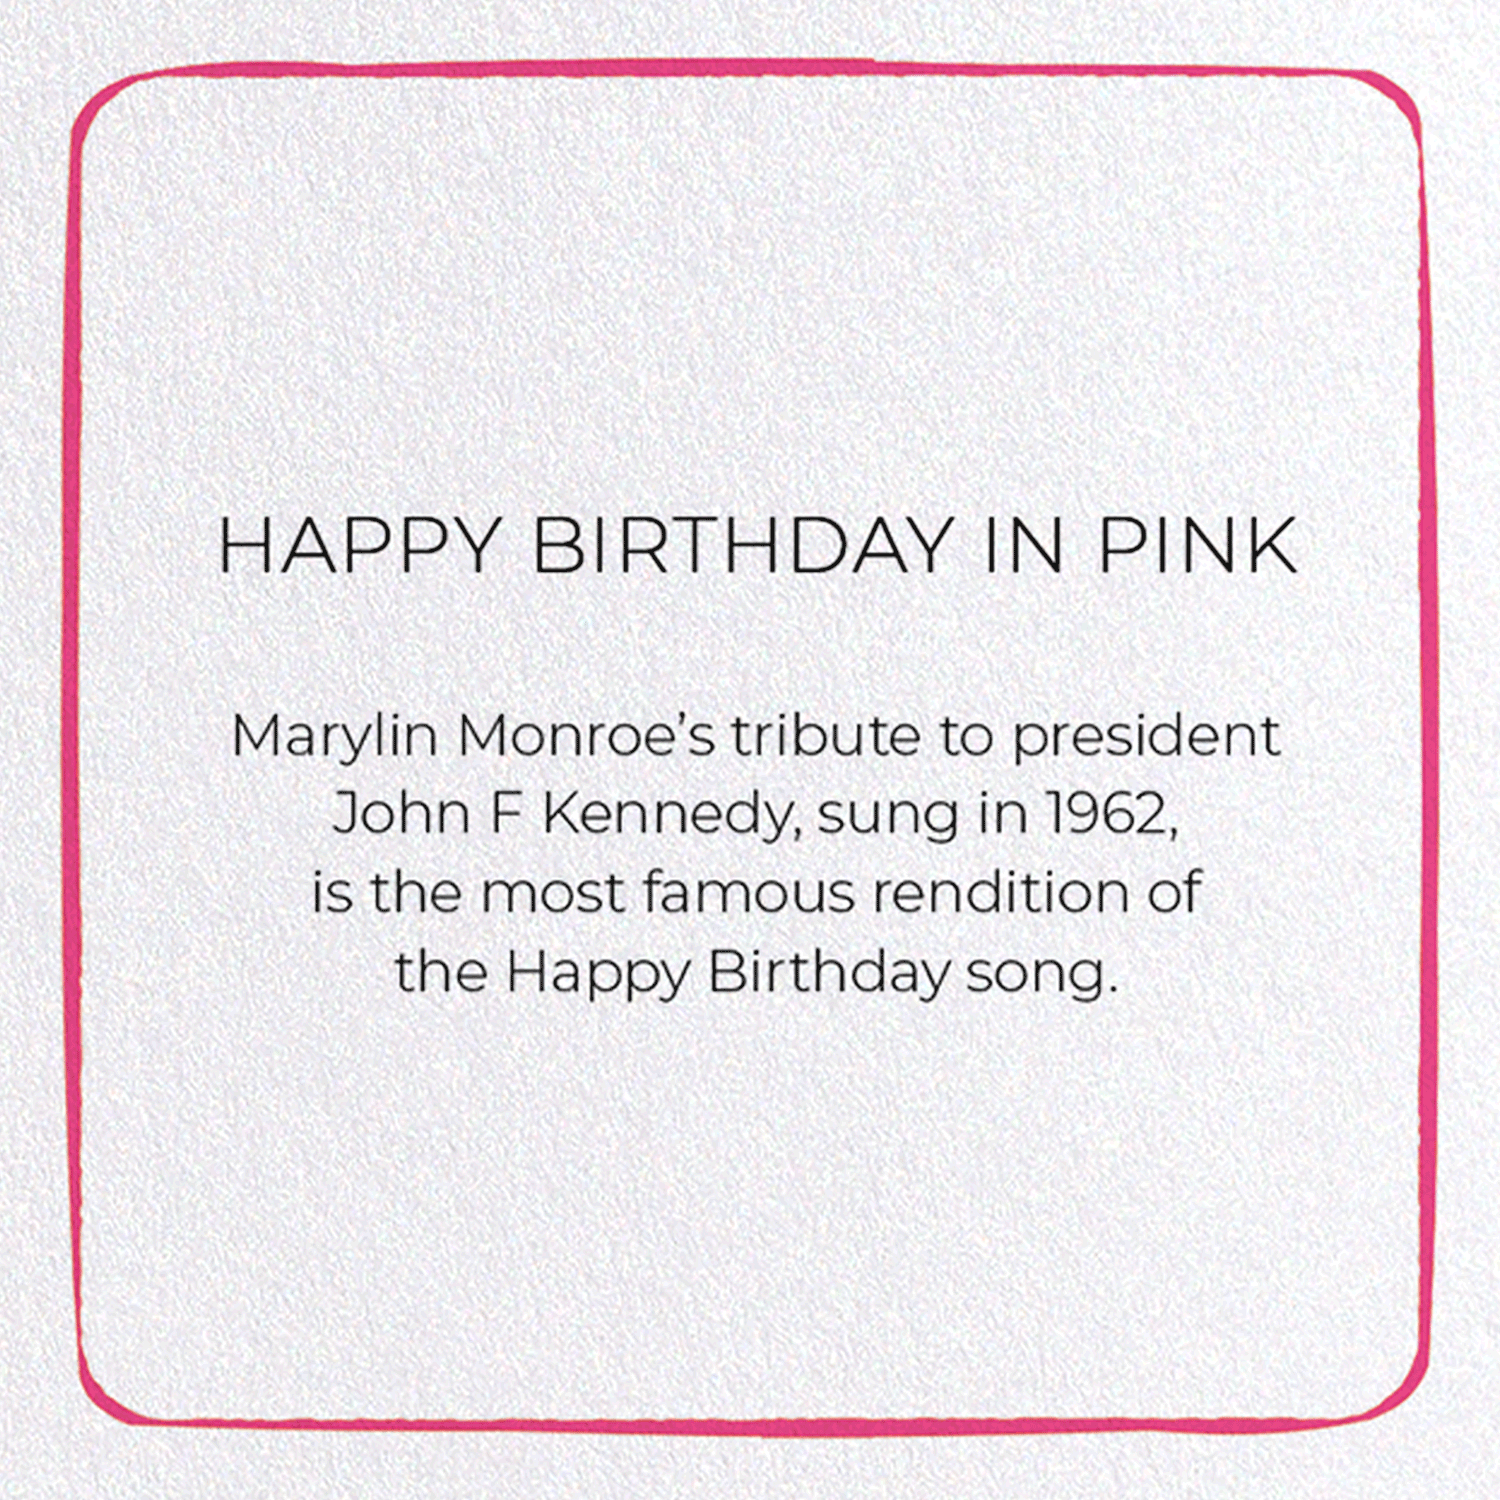 HAPPY BIRTHDAY IN PINK: Colourblock Greeting Card